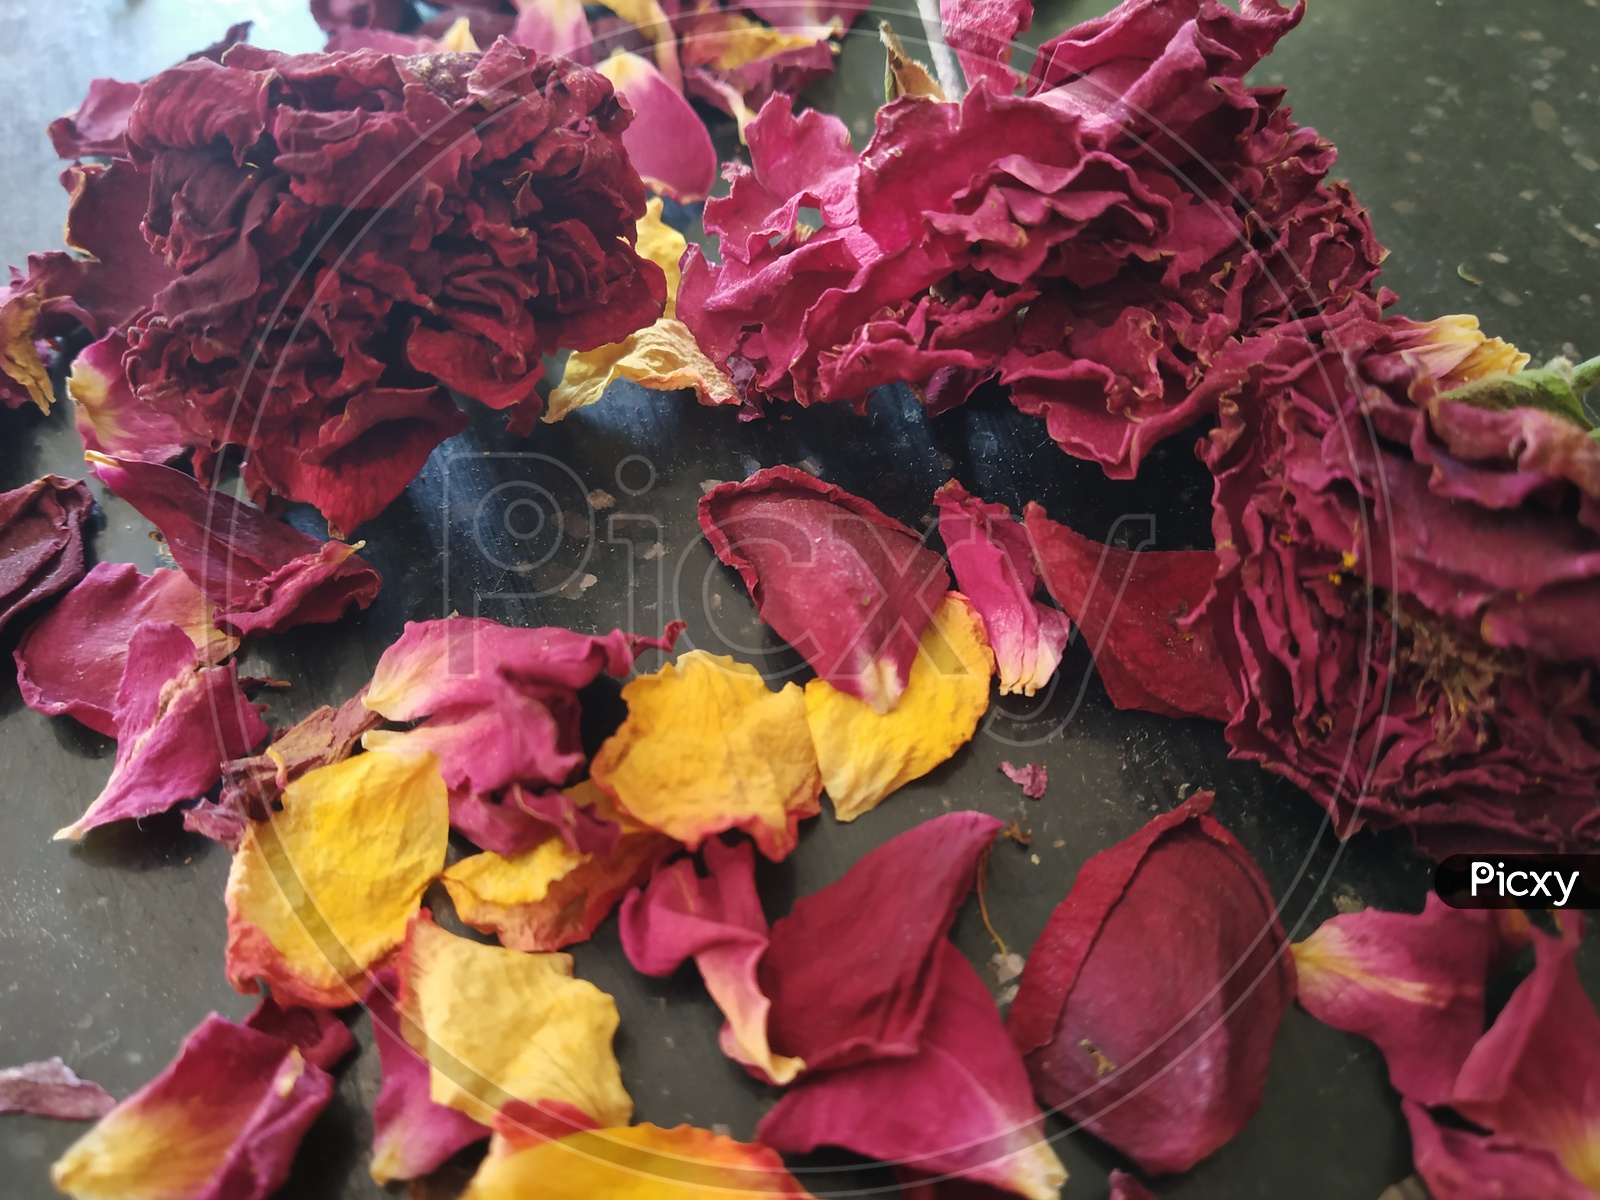 Sun dried Rose flowers and petals